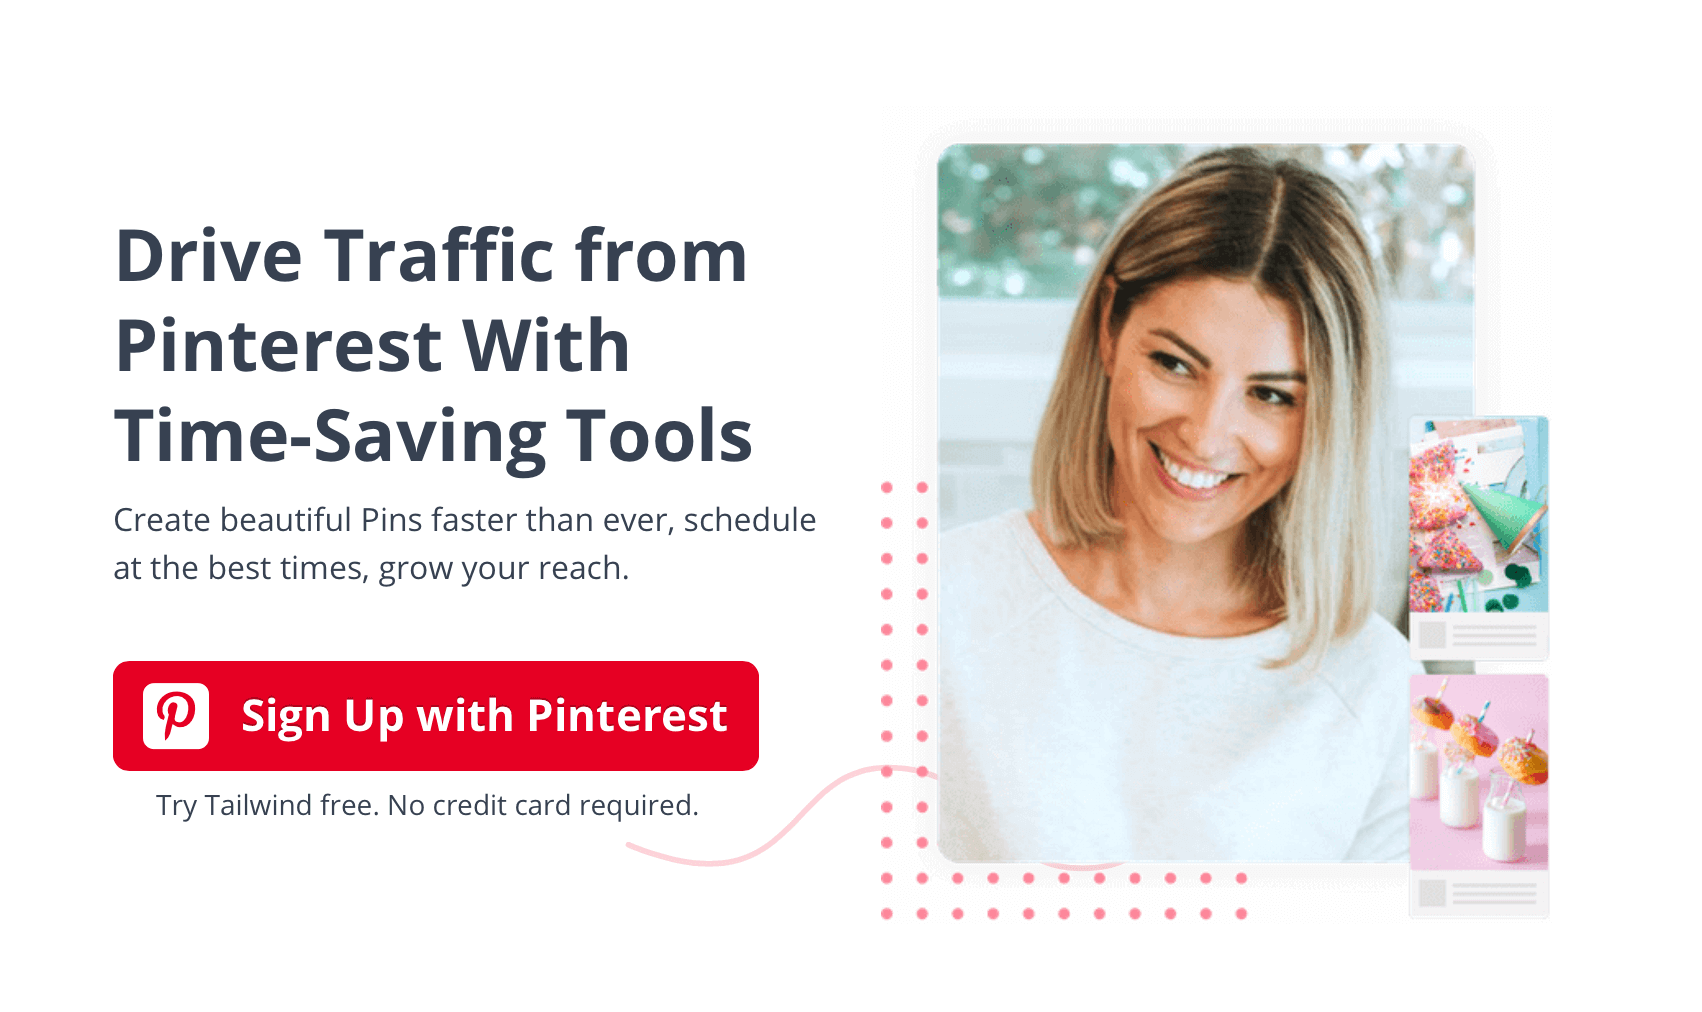 Drive traffic with Tailwind and Pinterest.